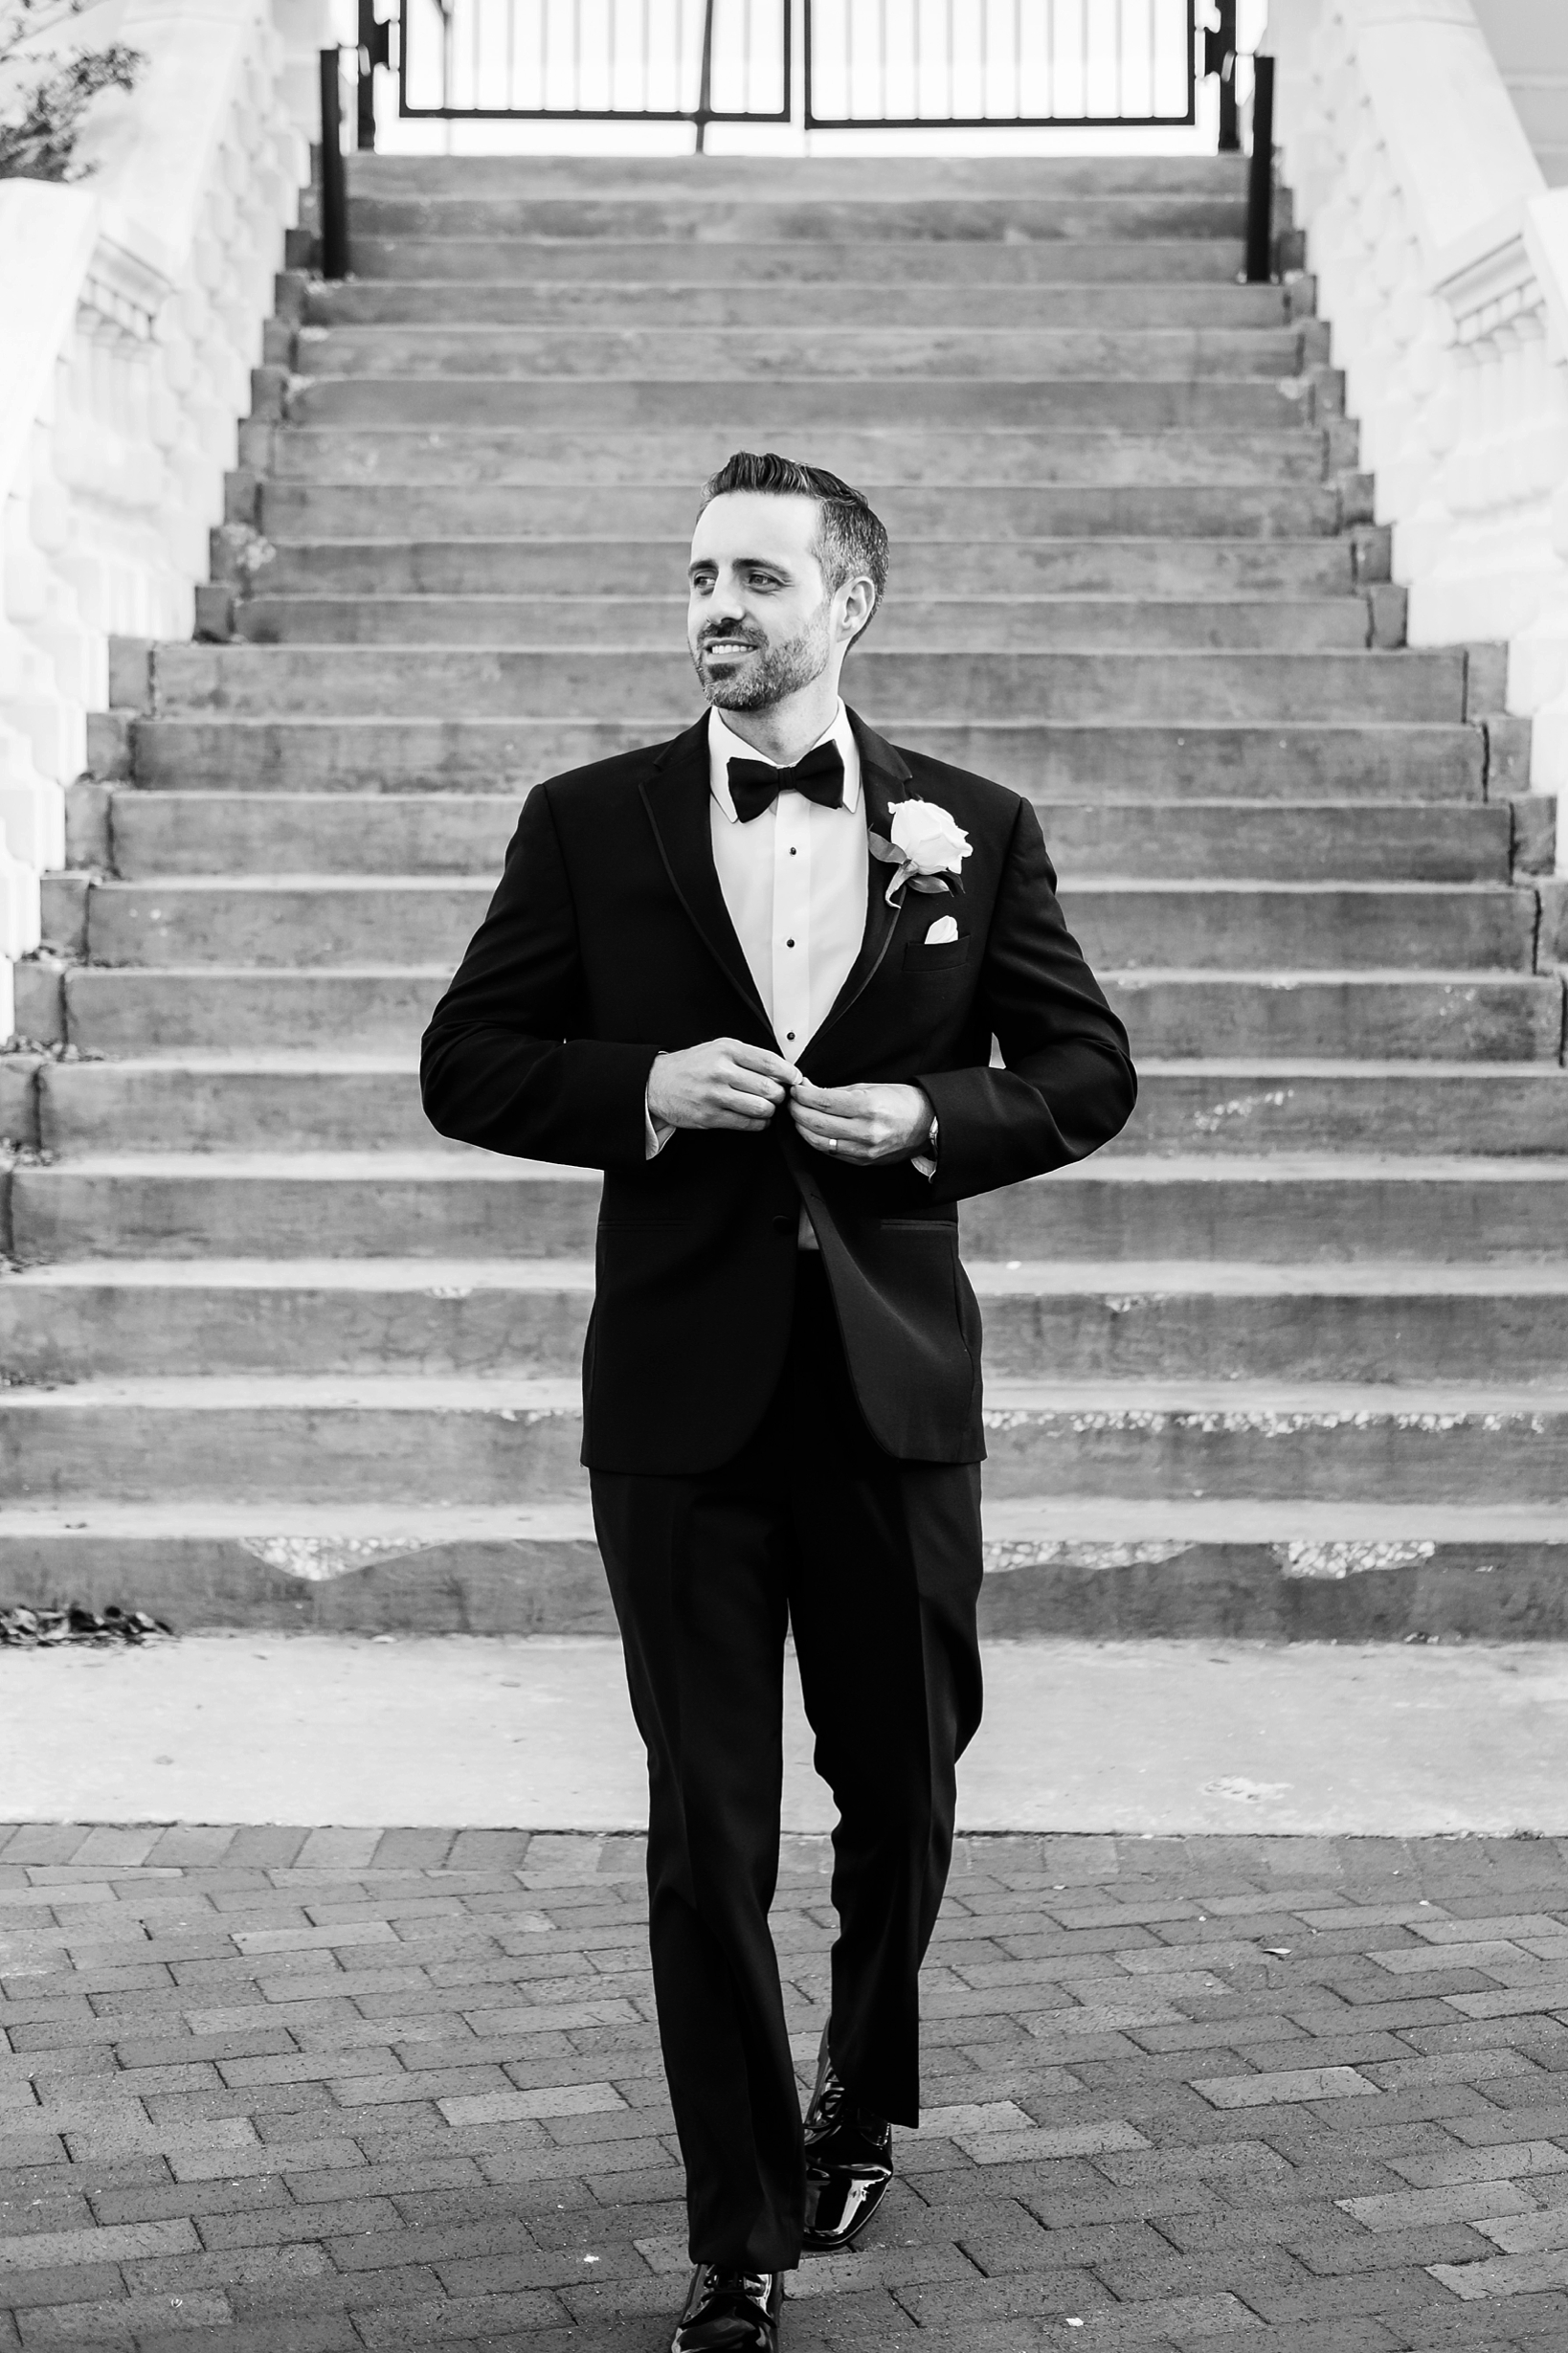 Portrait of the Groom buttoning his suit jacket in black and white by Sarah & Ben Photography